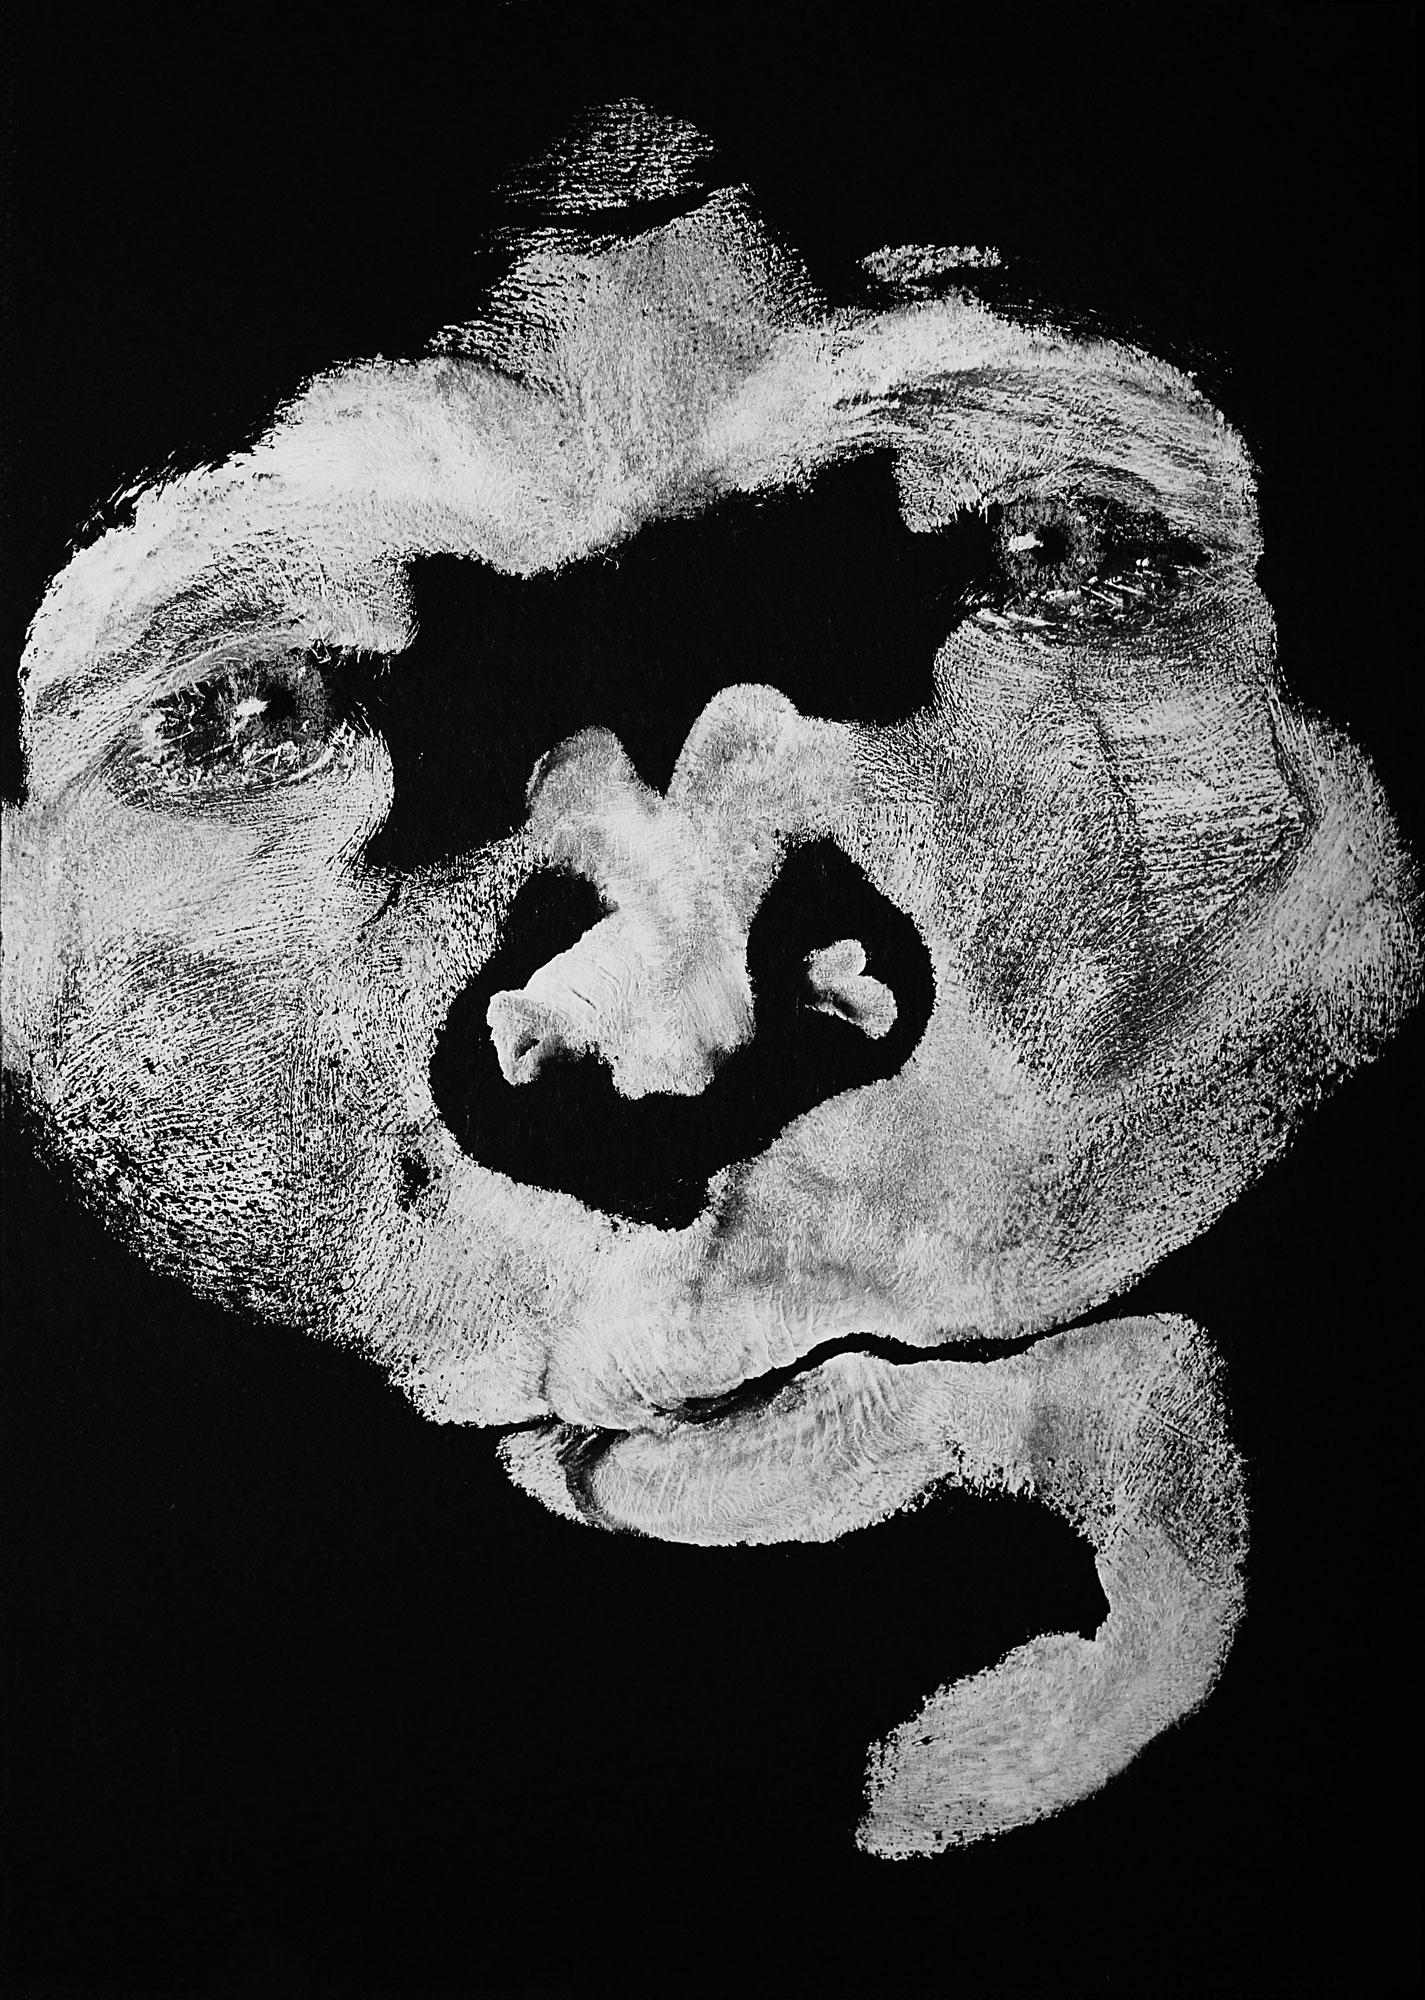 unique imprint of a face suggesting some emotion, in white color on black cardboard, with eyes drawn in white pastel